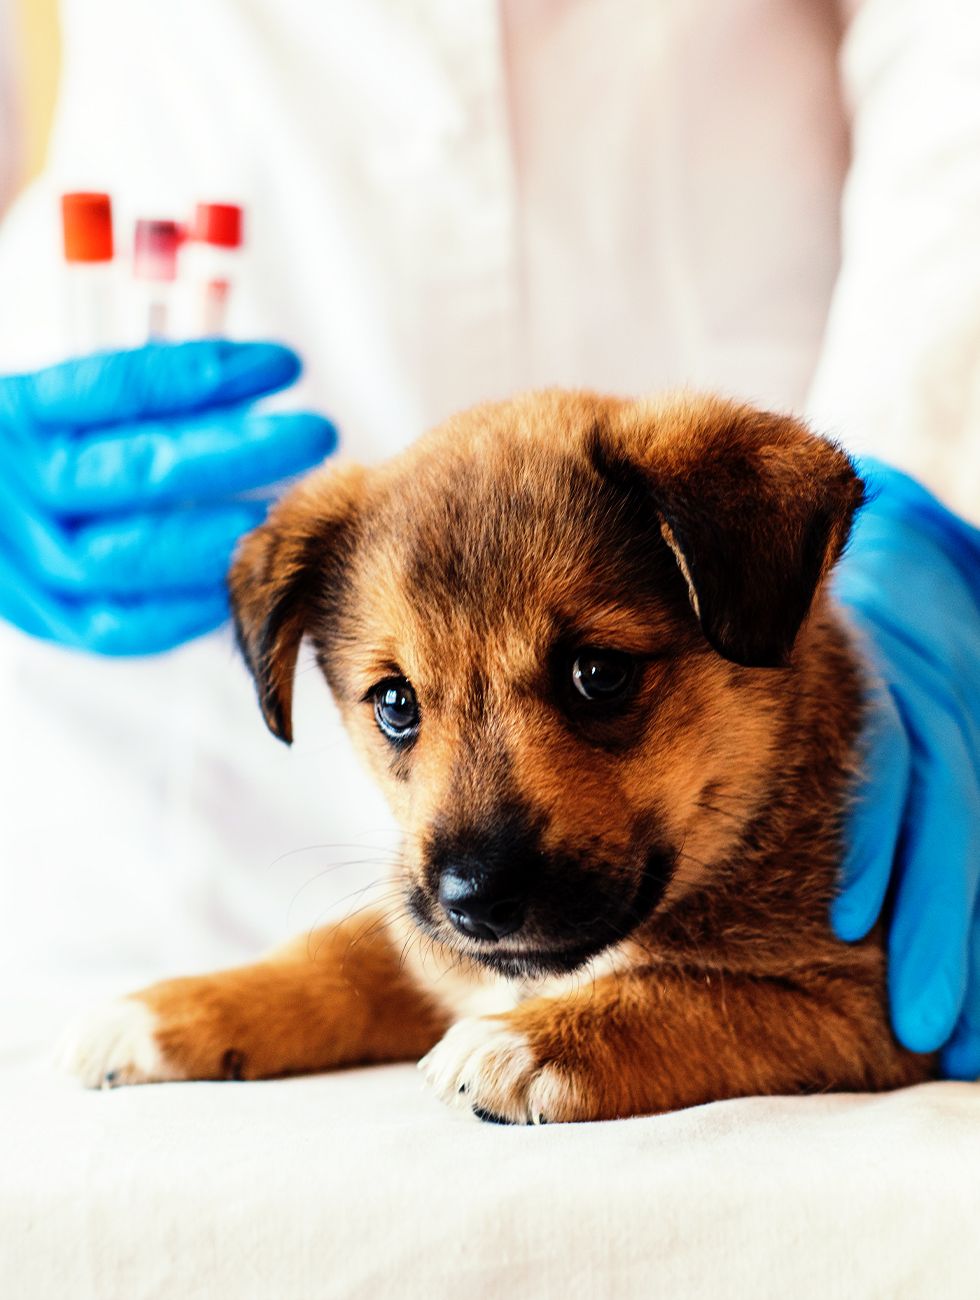 A veterinarian at 4 Pets Animal Clinic, serving Tamarac, Coral Springs, North Lauderdale, and surrounding Florida areas, collects a blood sample from a puppy for in-house laboratory testing.